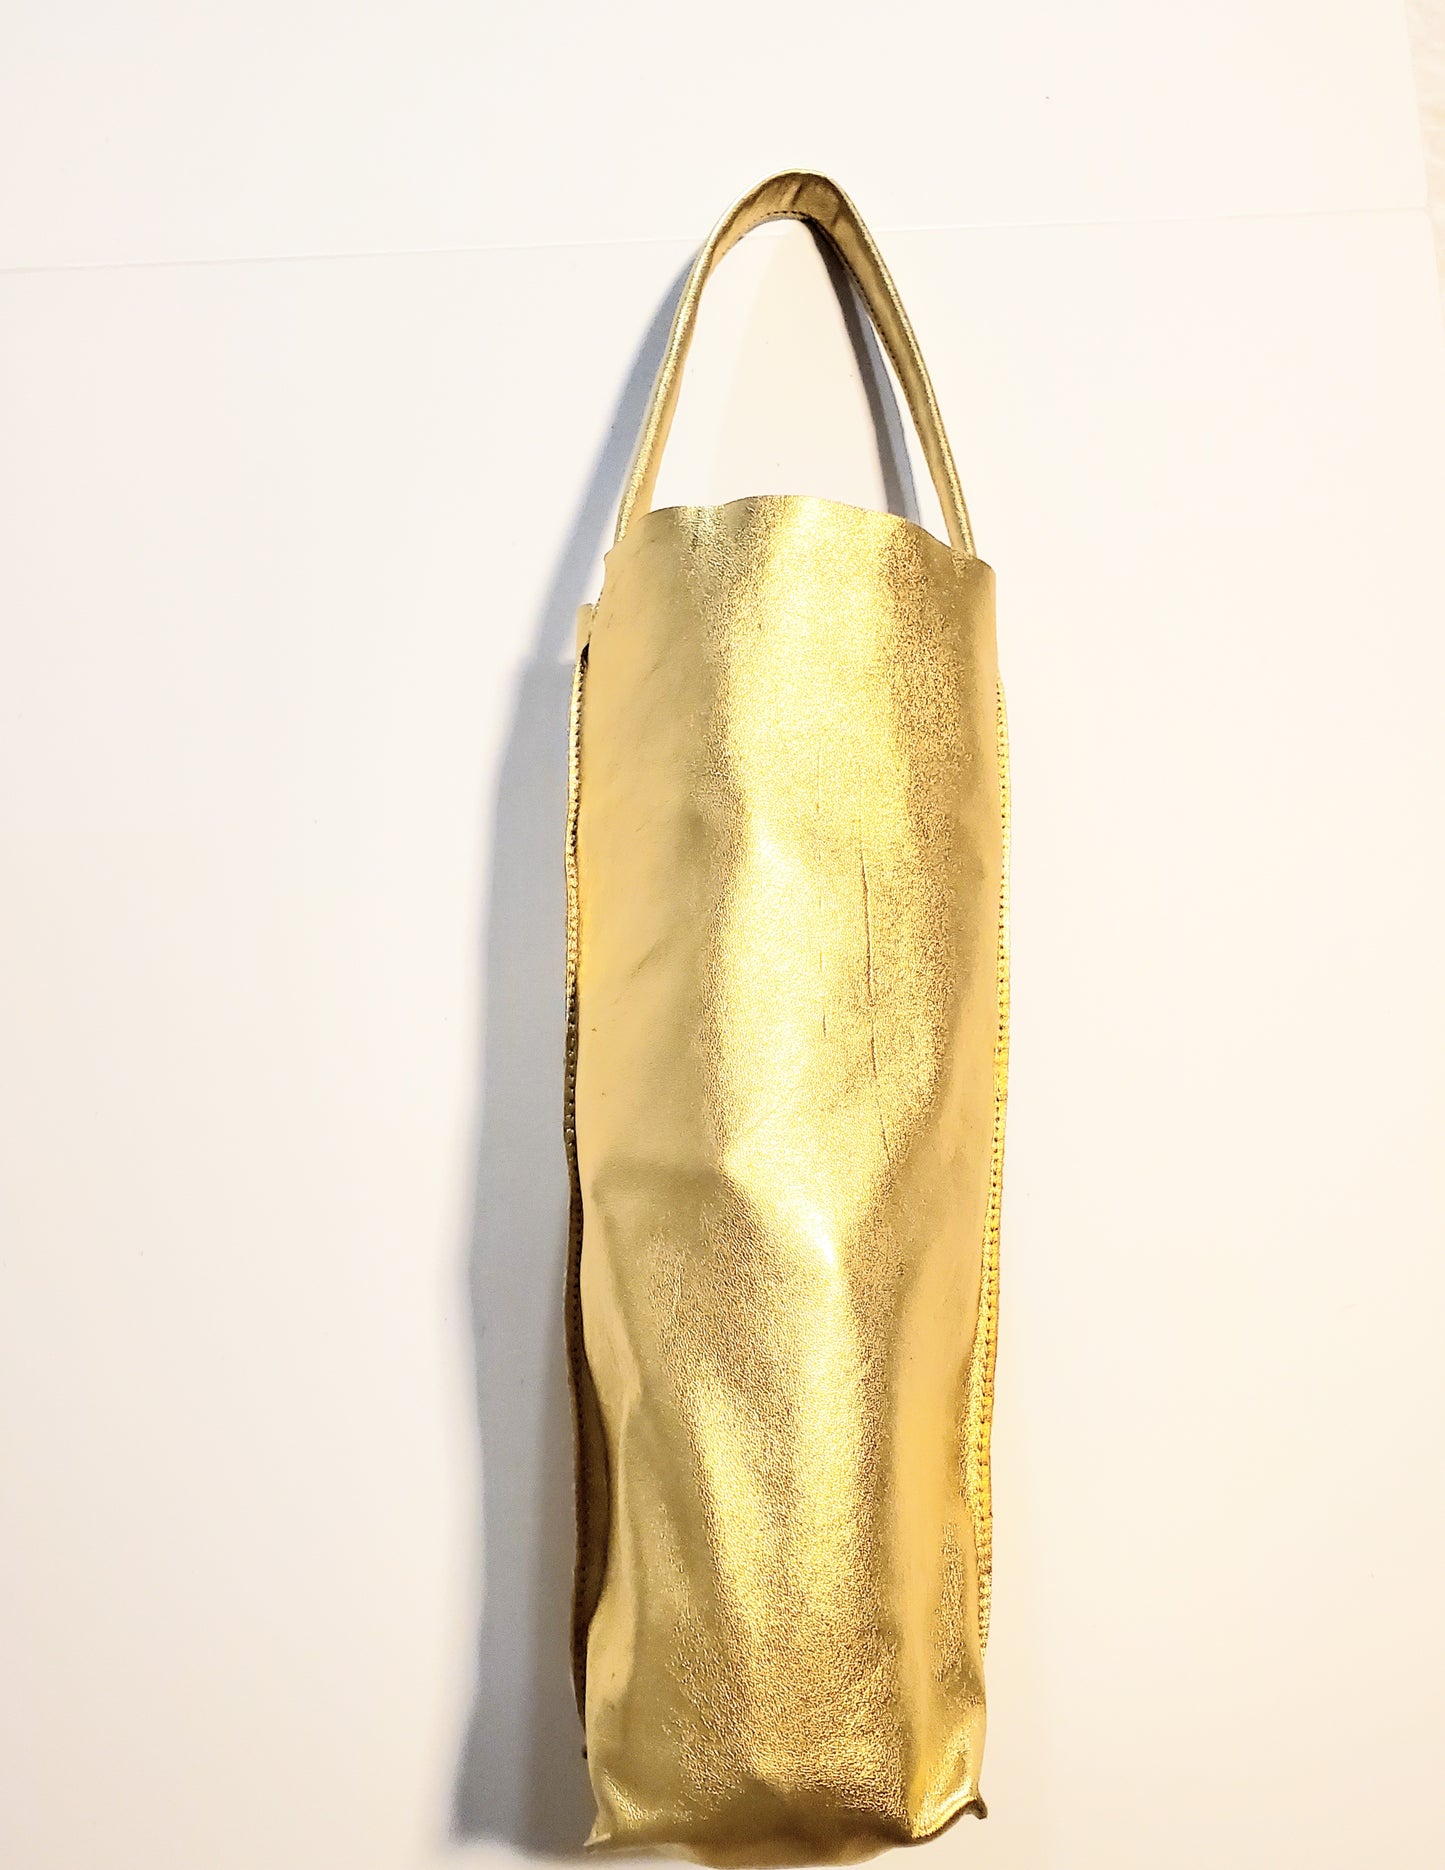 Gold leather wine bag. Made in LA